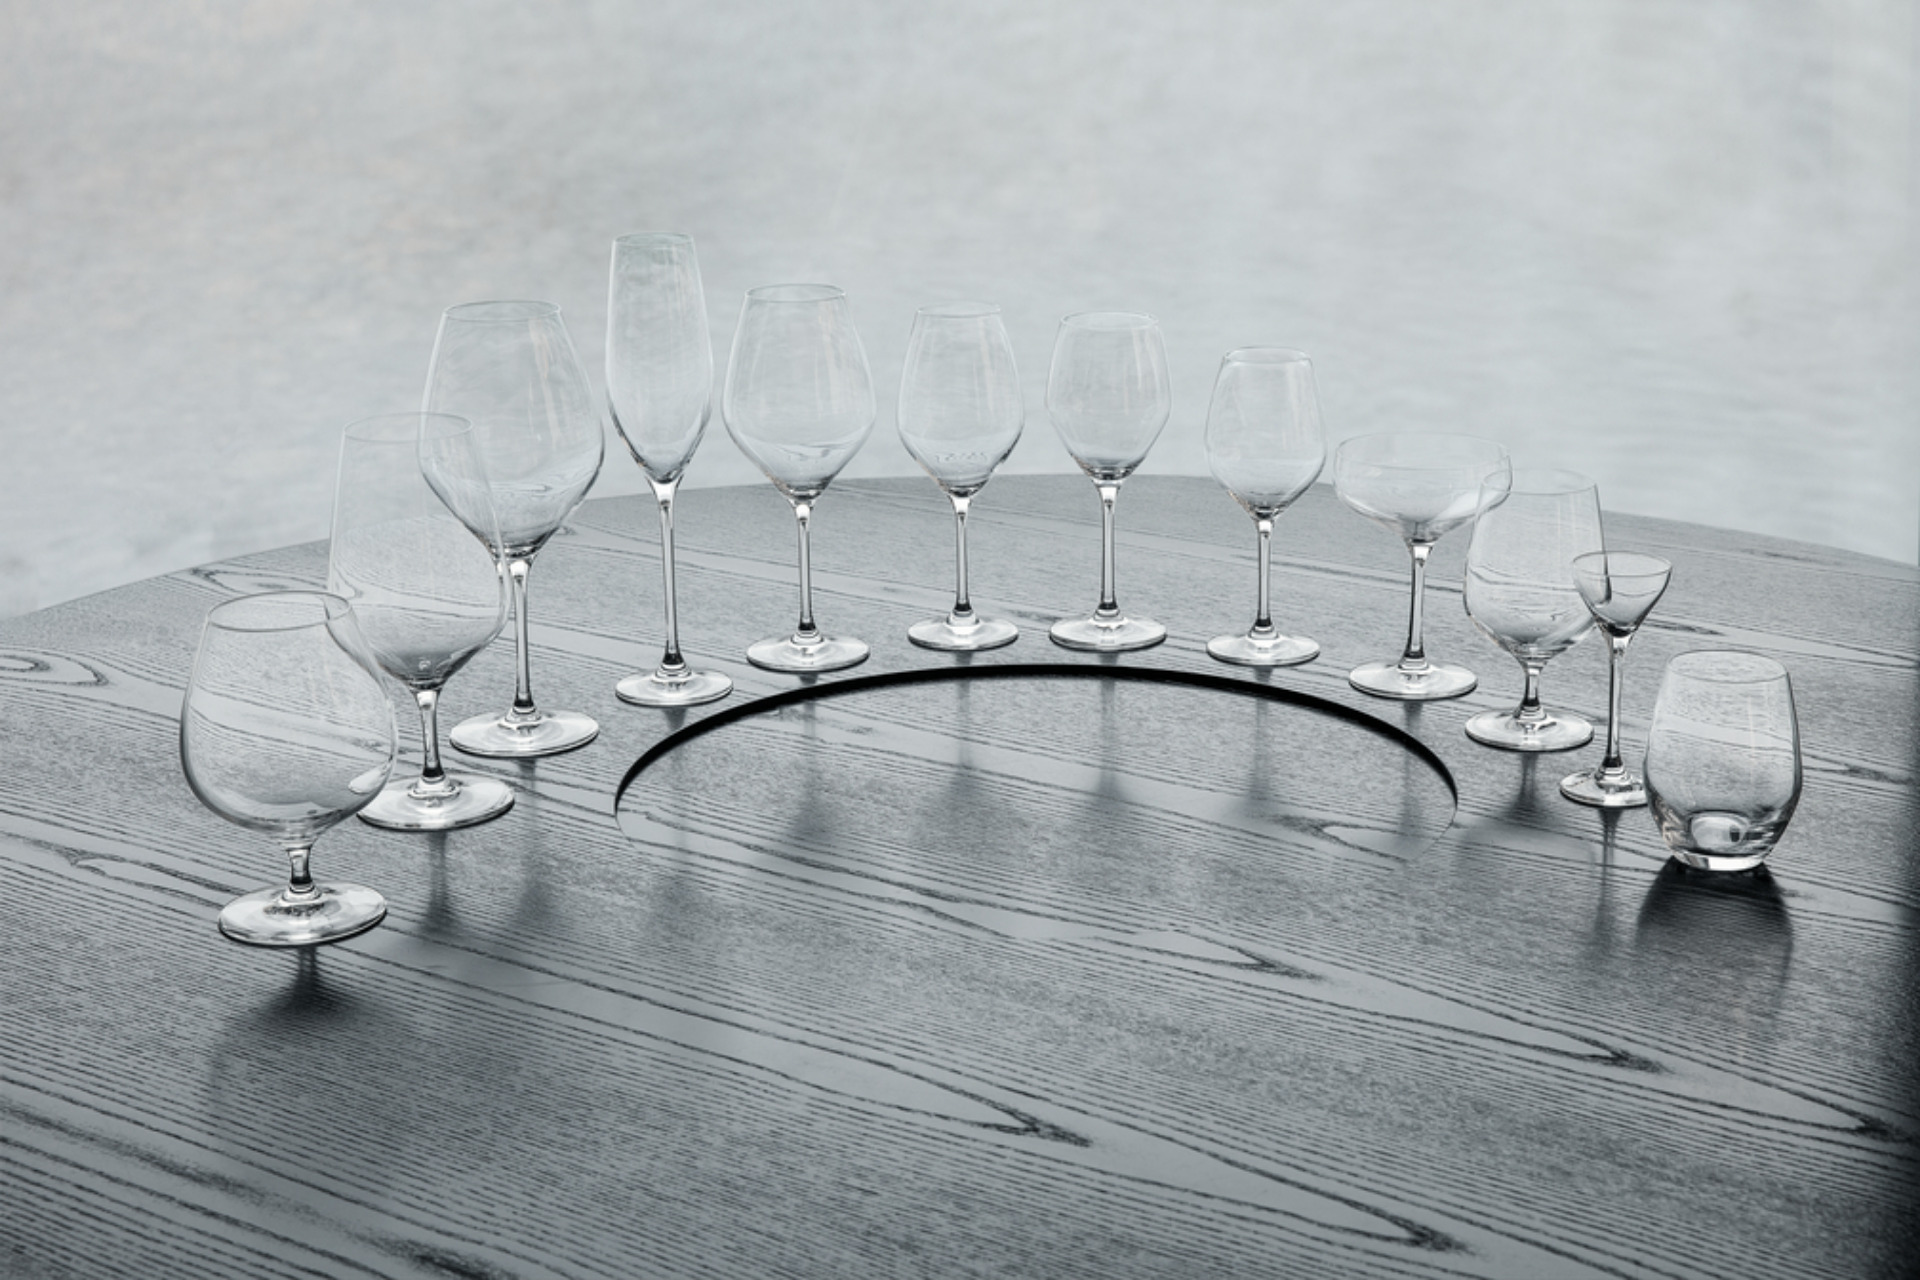 Line of glass from the series Cabernet, Holmegaard, designed by Peter Svarrer